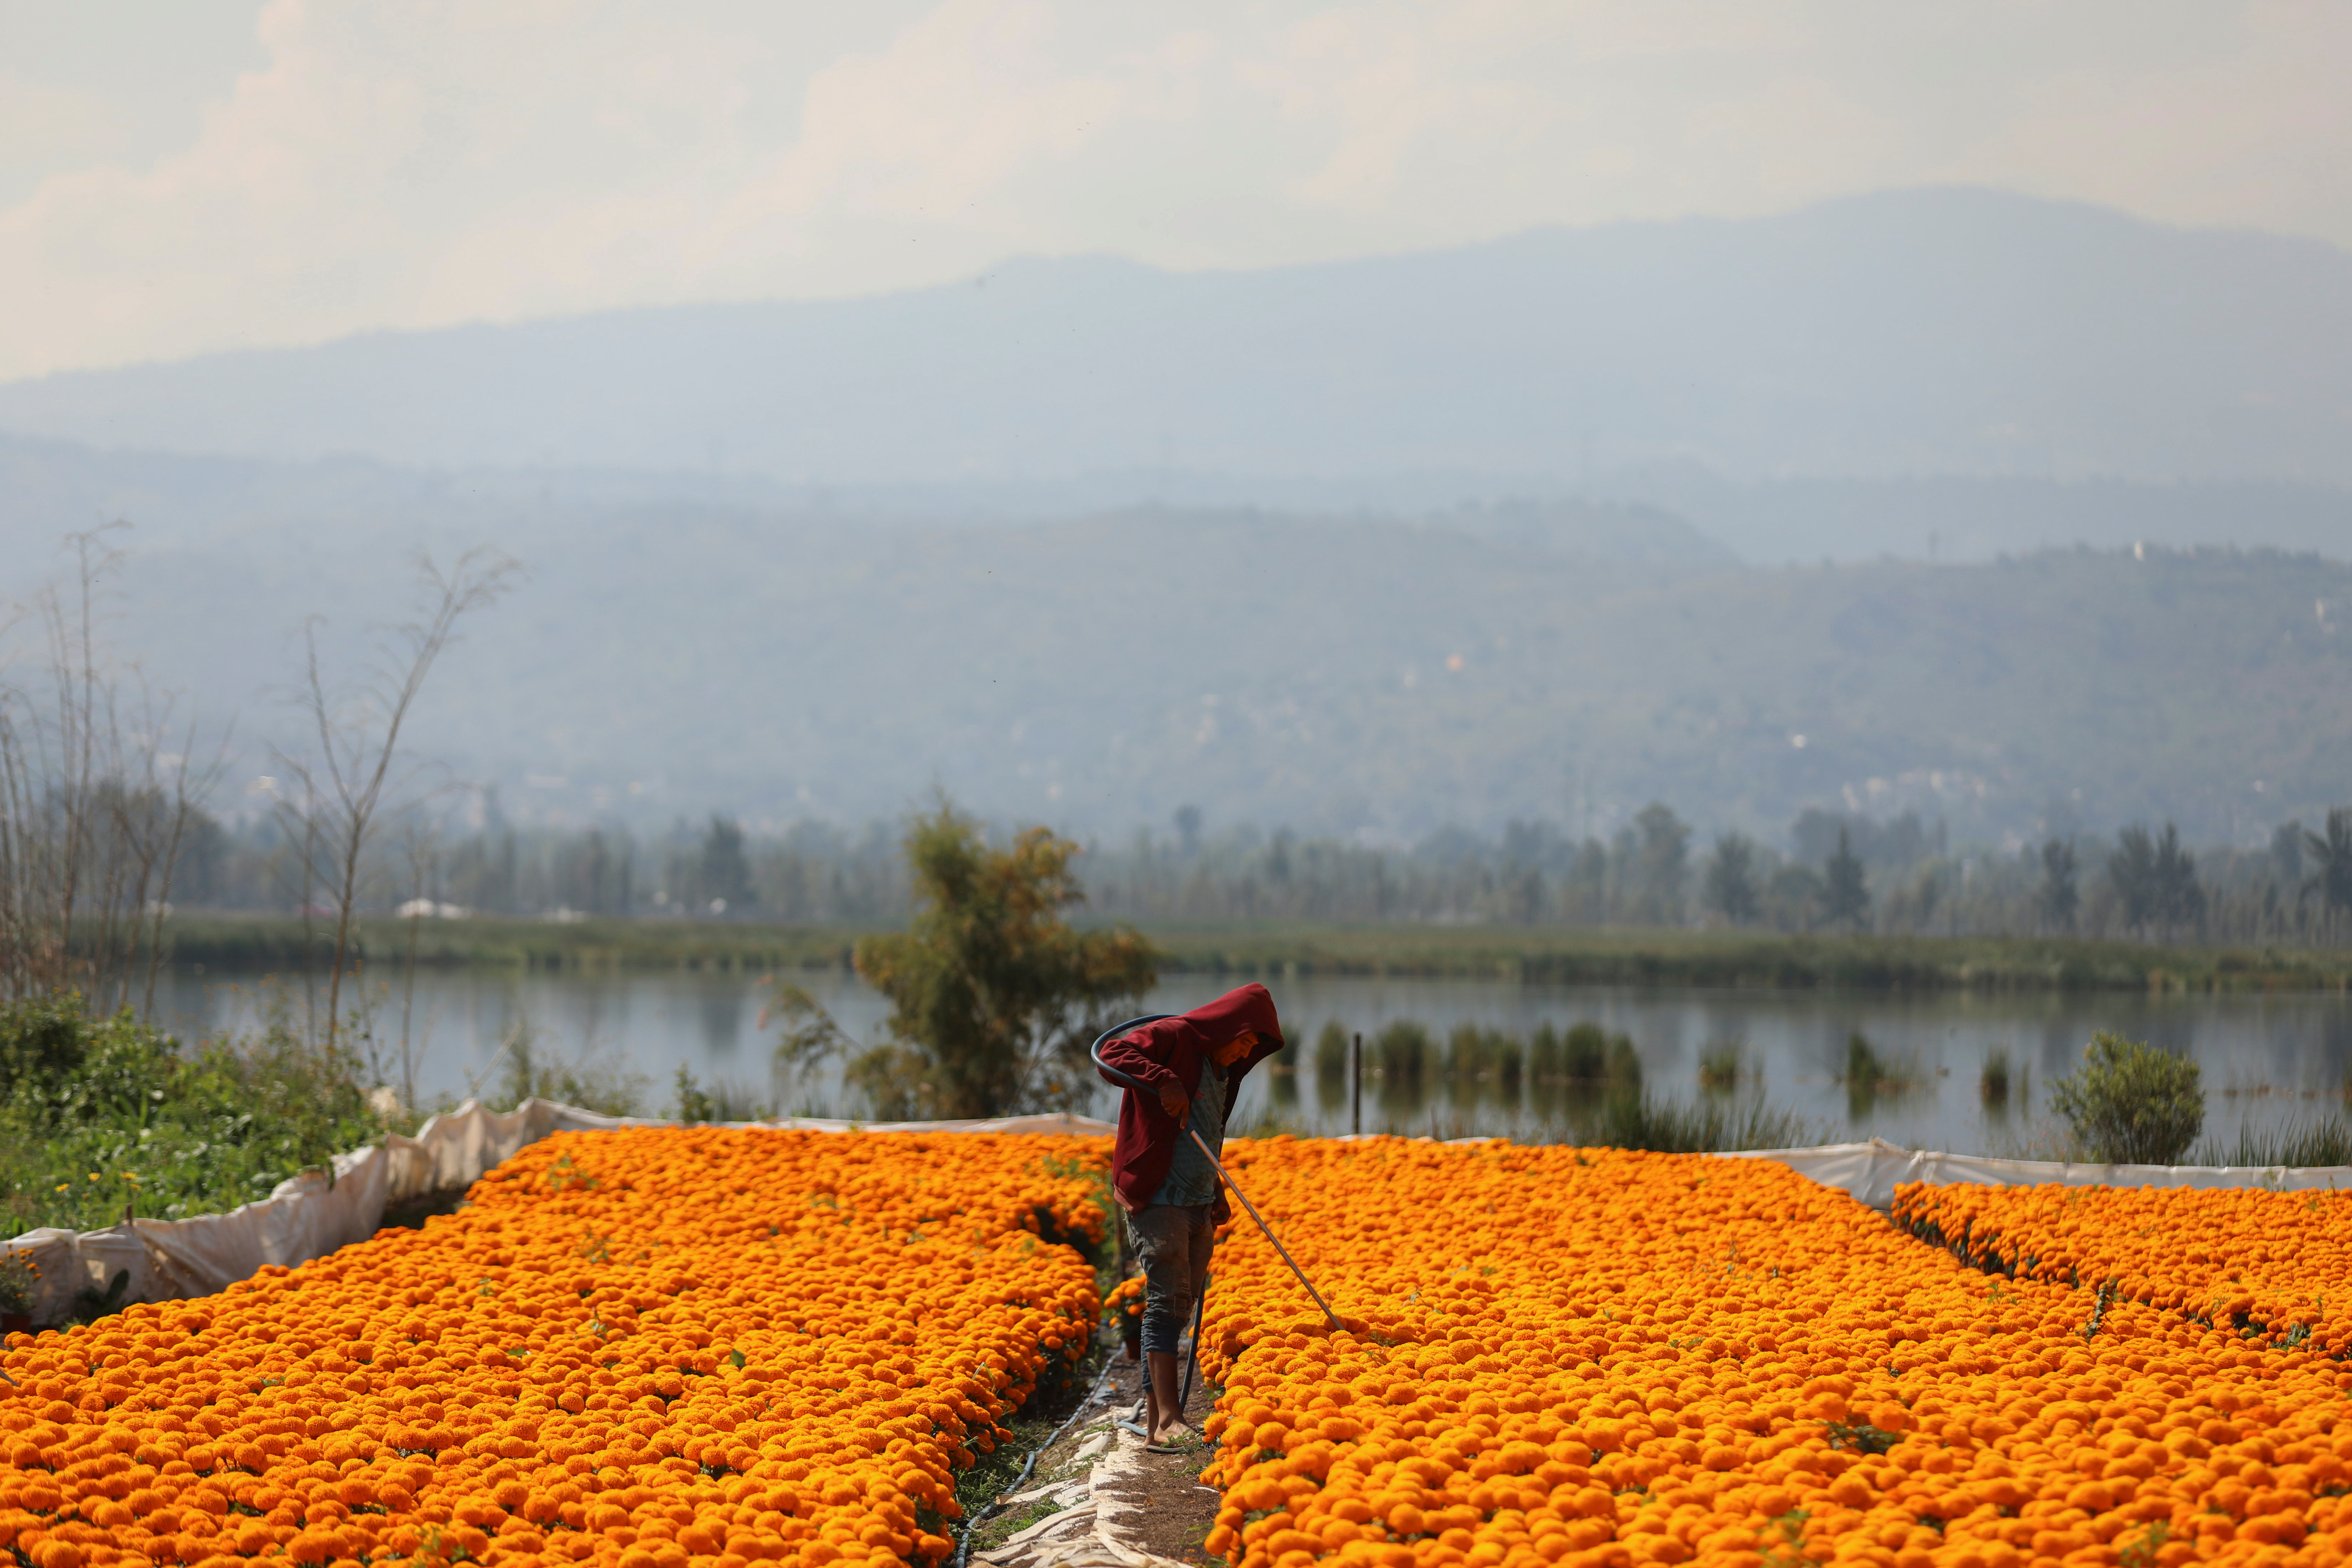 A worker waters Cempasuchil Marigolds to be used during Mexico's Day of the Dead celebrations at San Luis Tlaxialtemalco nursery, in Xochimilco on the outskirts of Mexico City, Mexico October 28, 2021. REUTERS/Edgard Garrido